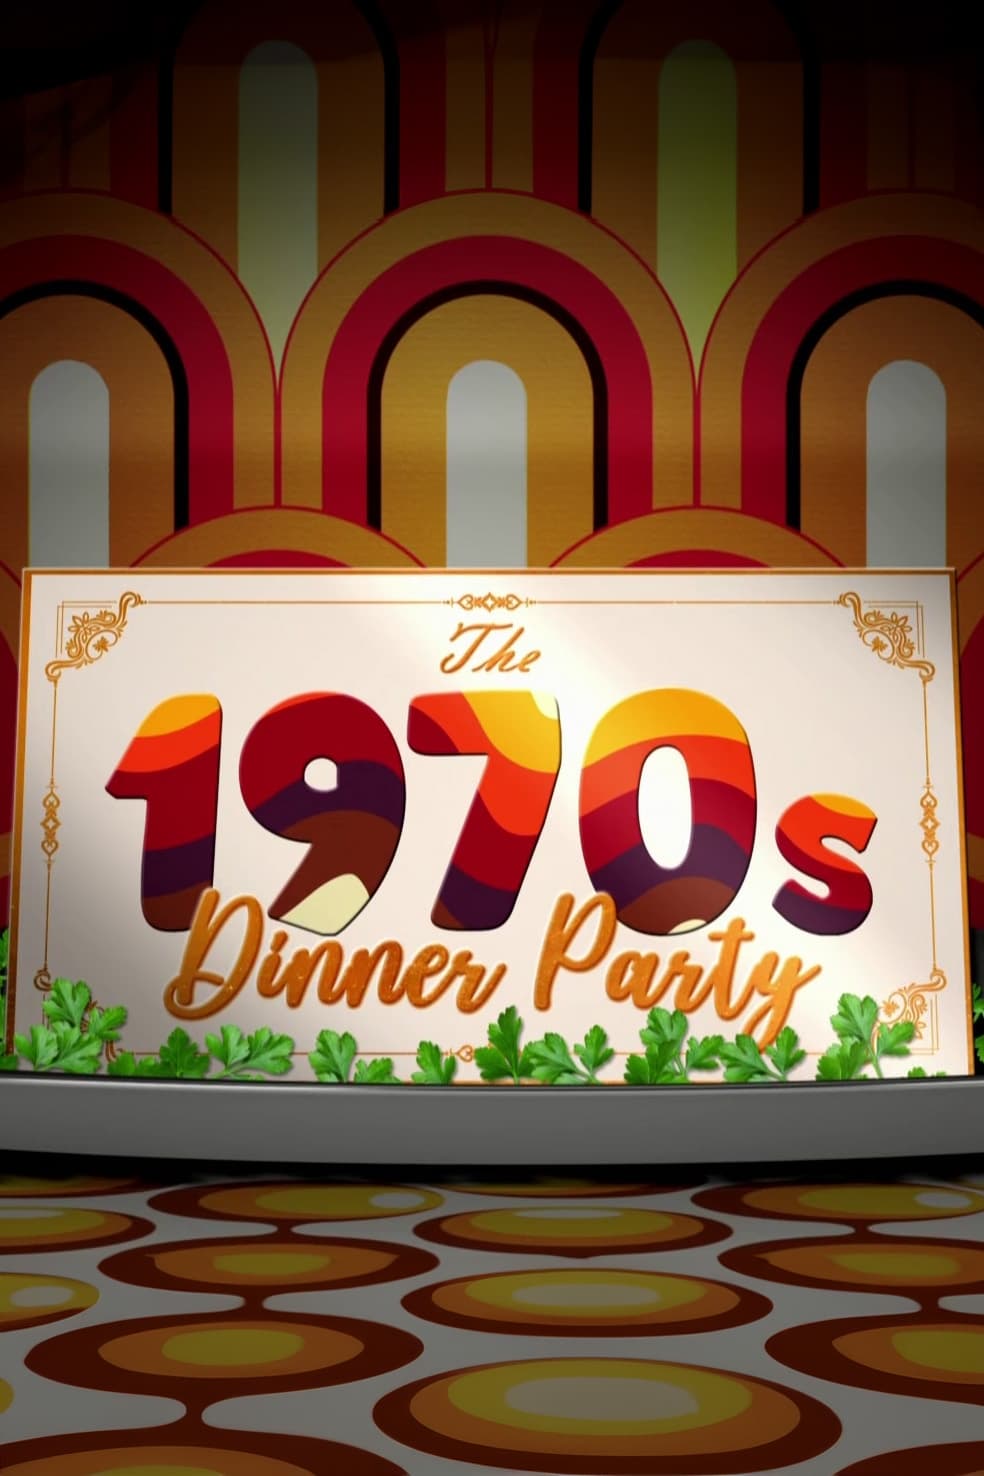 The 1970s Dinner Party